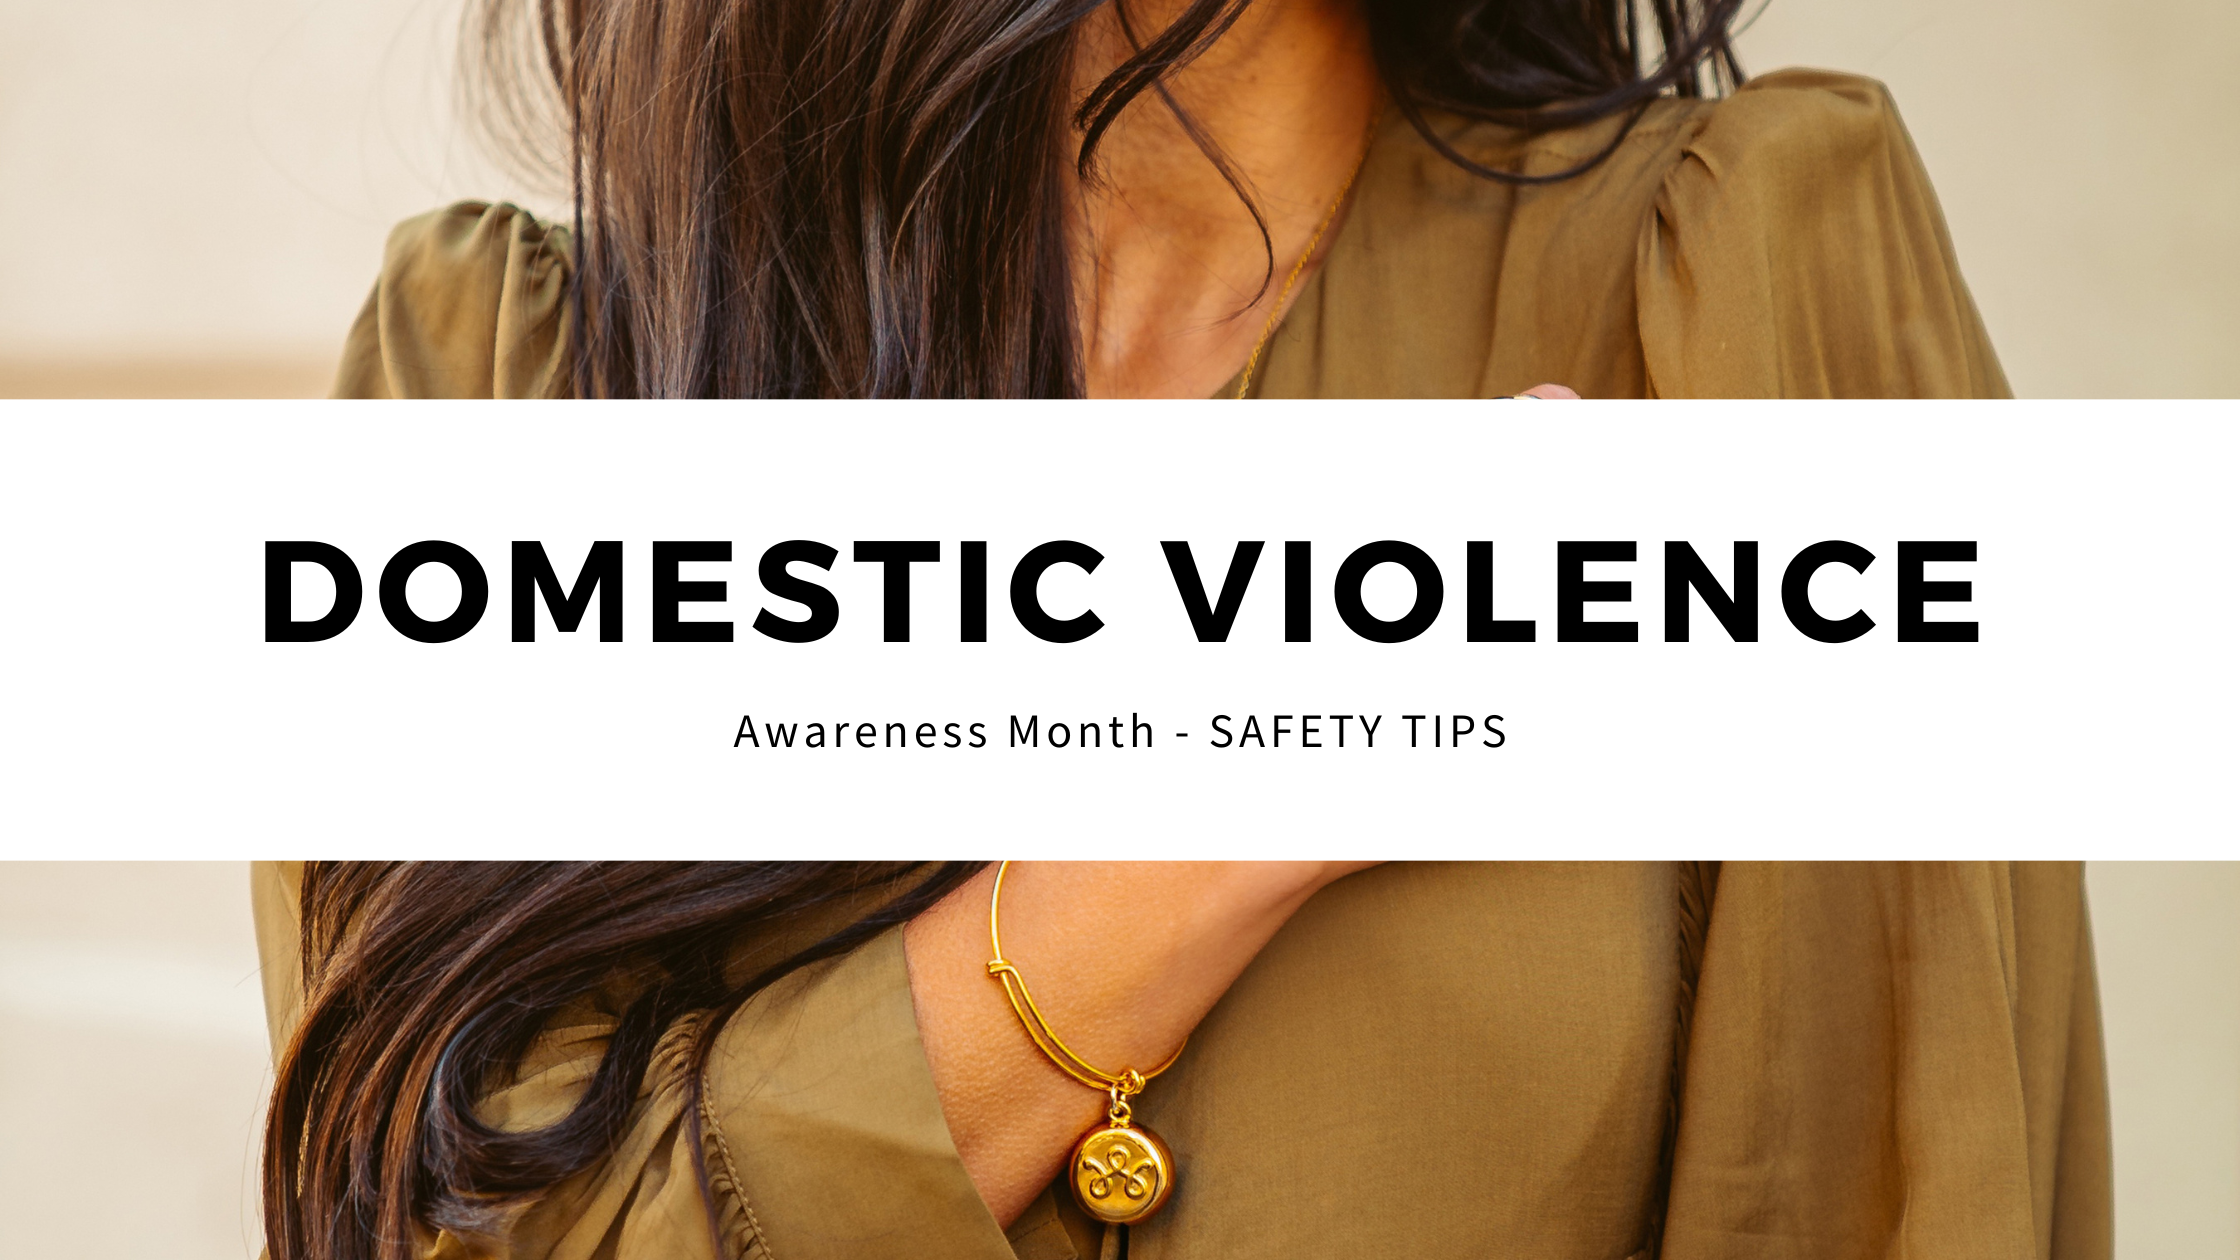 Domestic Violence Awareness Month - Safety Tips